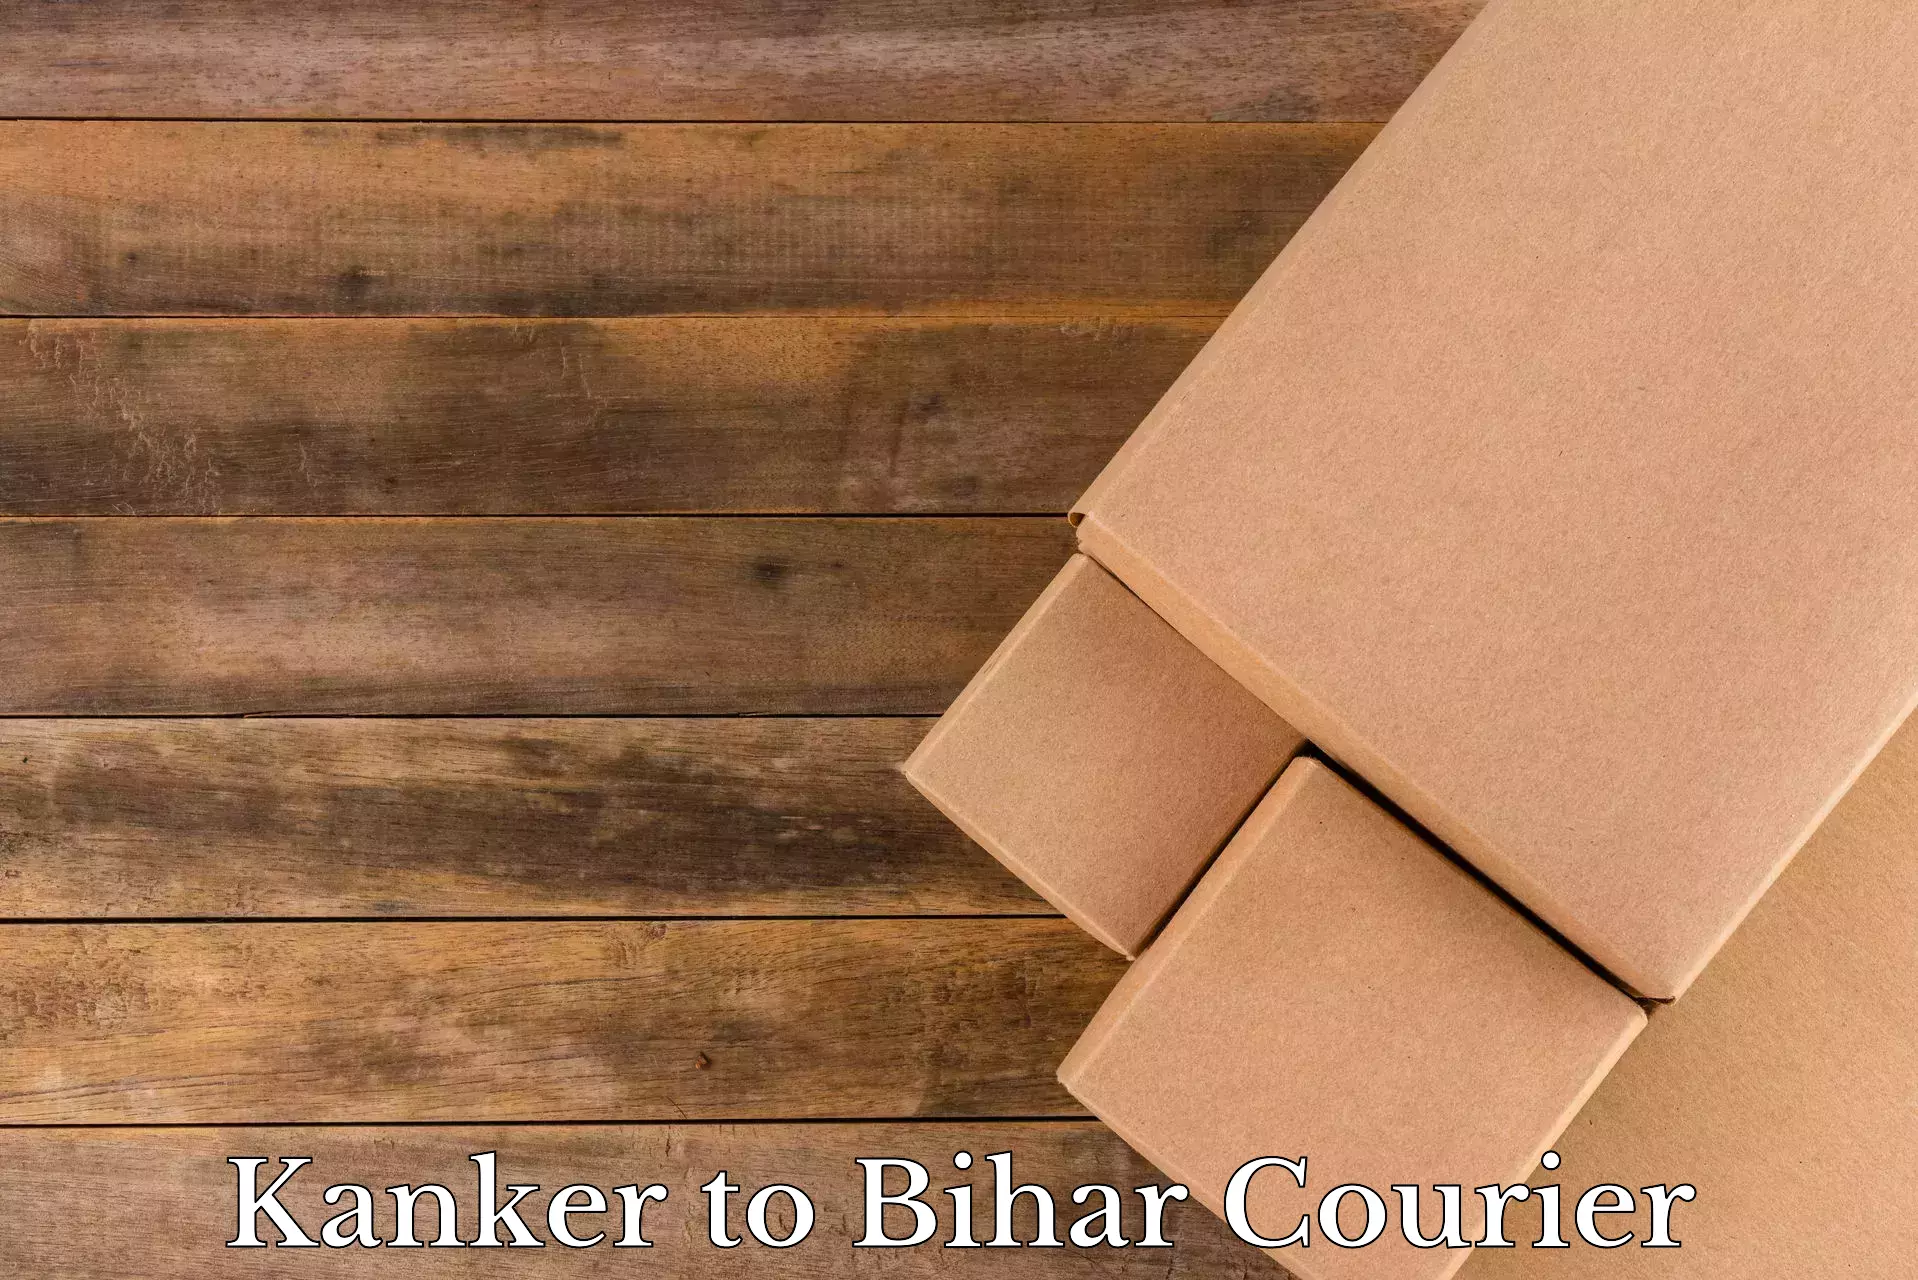 Trusted relocation experts Kanker to Bhojpur